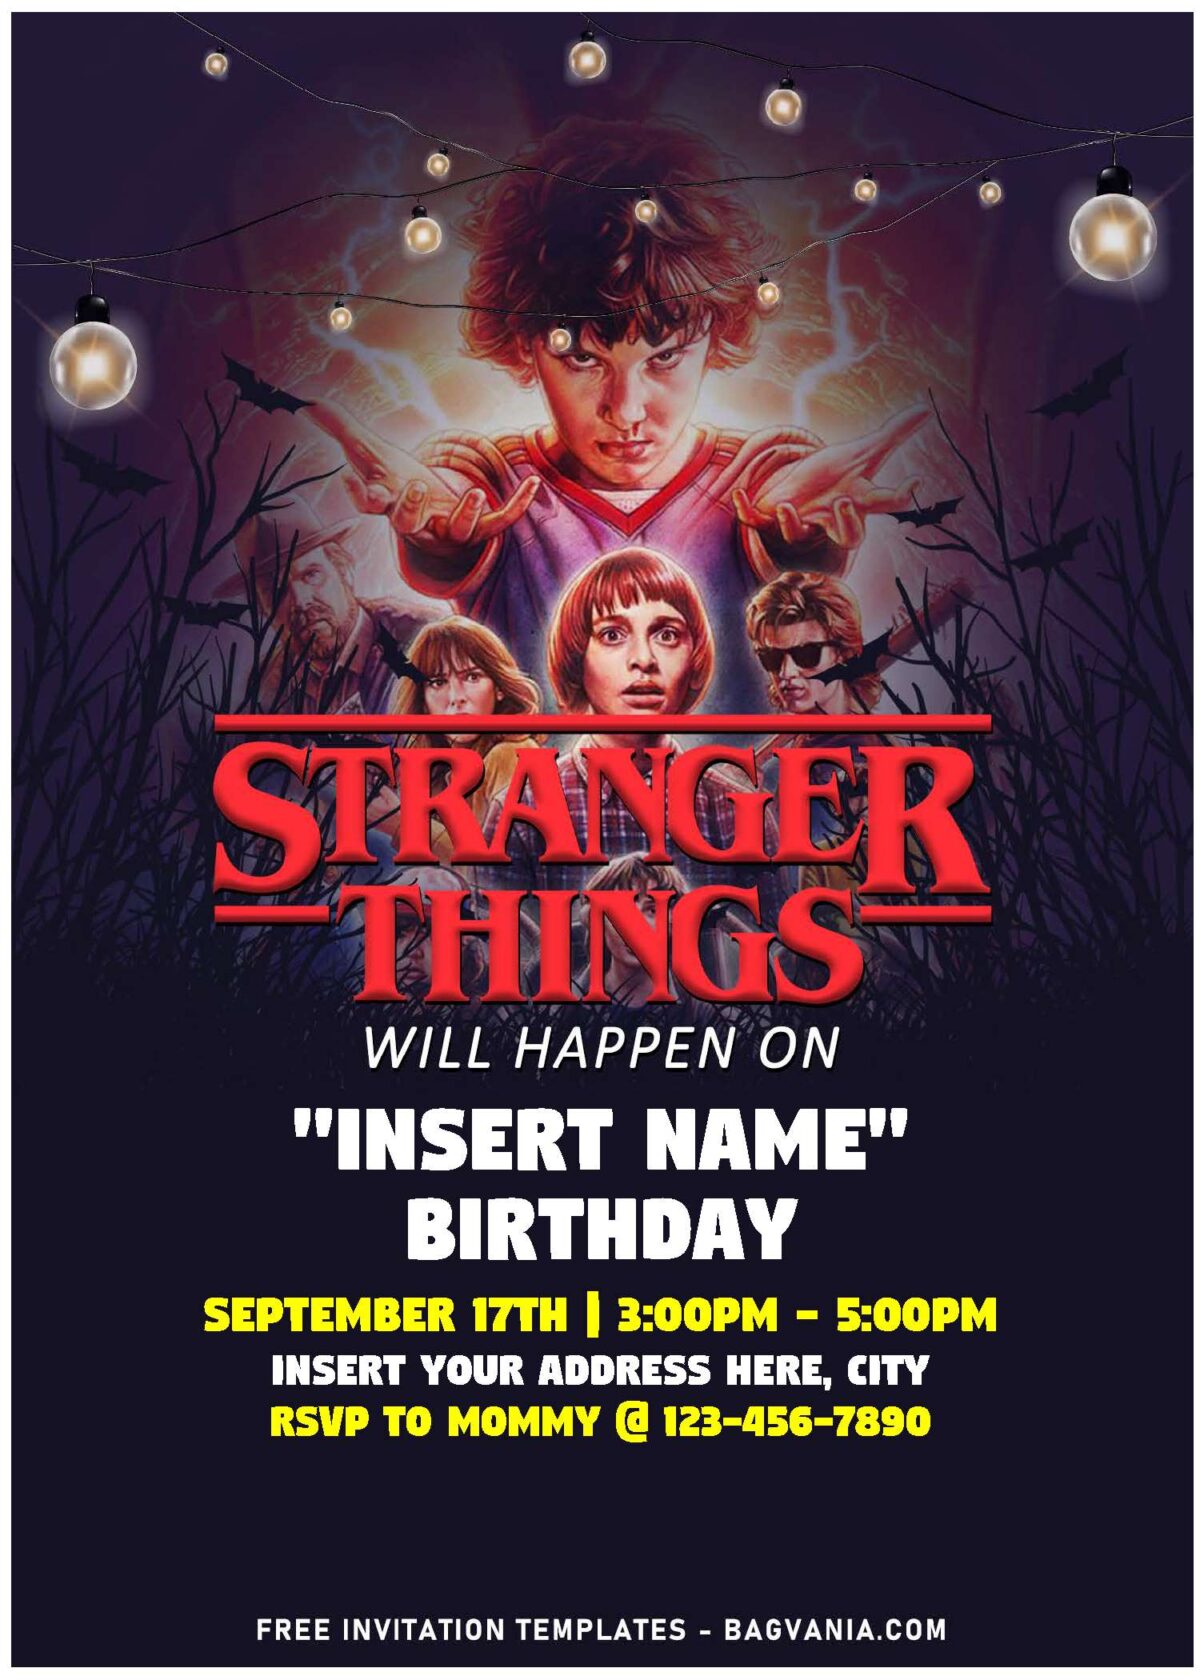 (Free Editable PDF) Stranger Things Are Happening Birthday Invitation Templates with Mike and Will